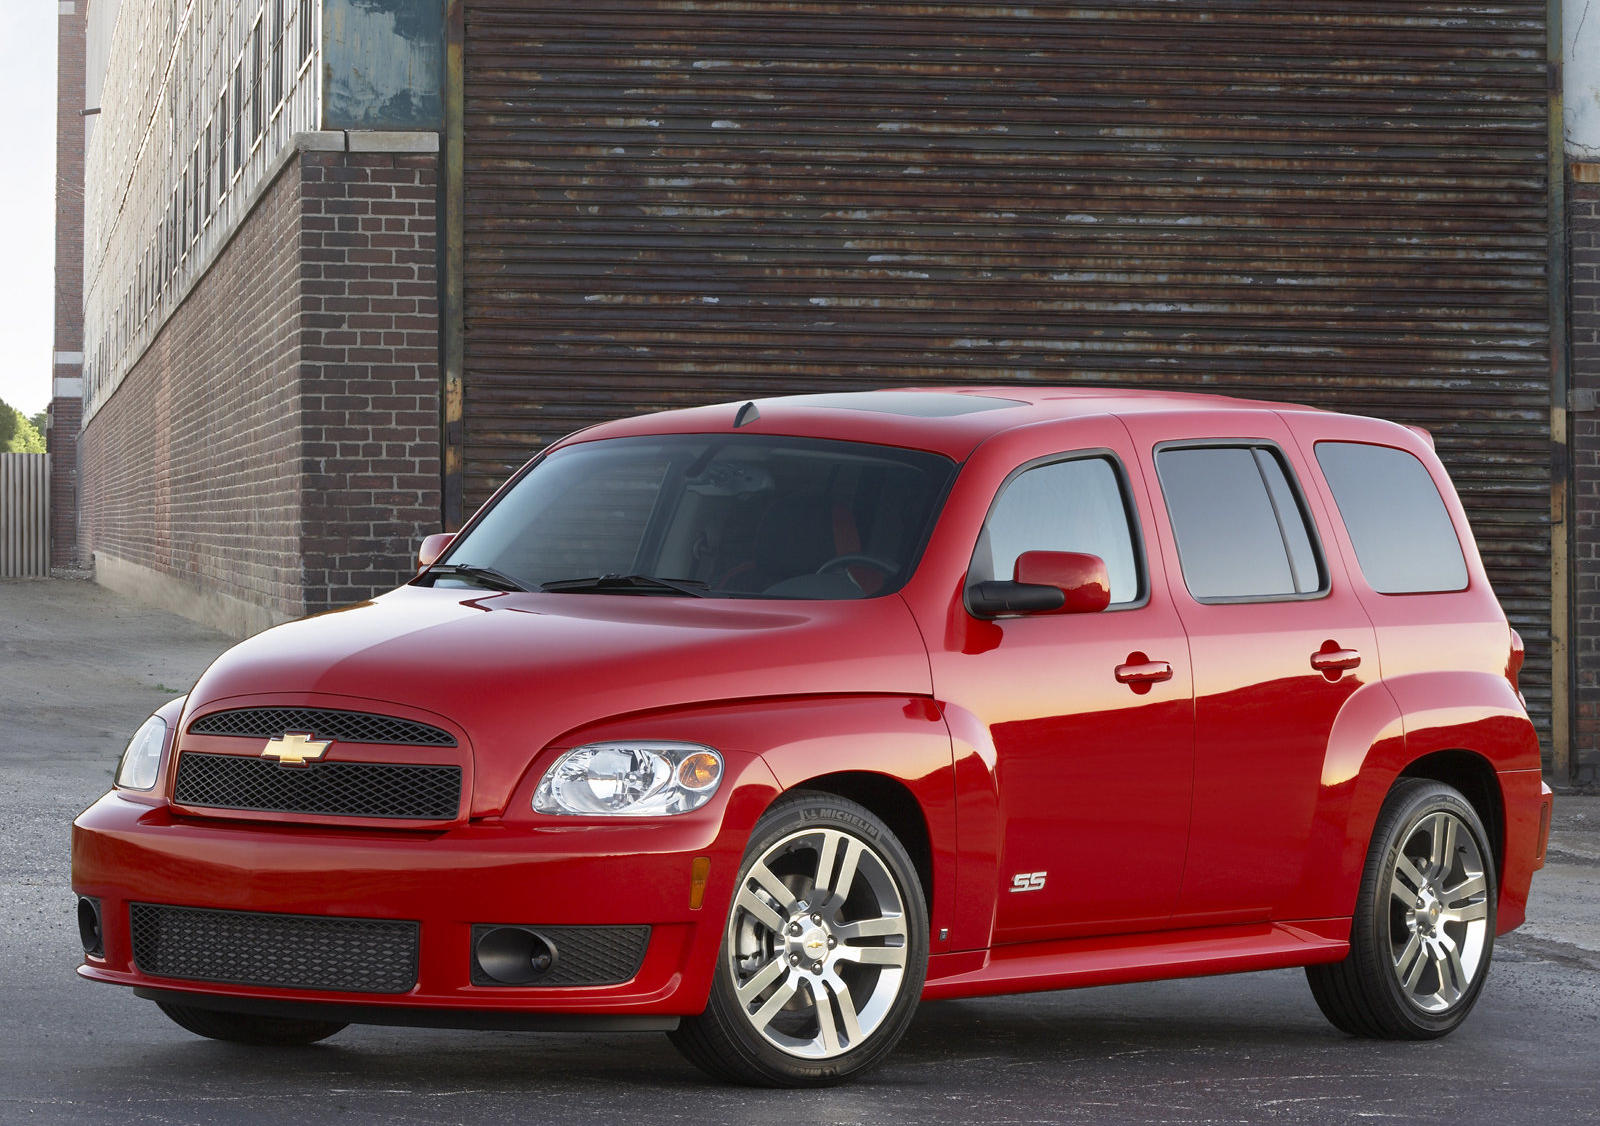 Photos of the 2010 Chevrolet HHR: See interior pictures of the 2010 Chevy H...